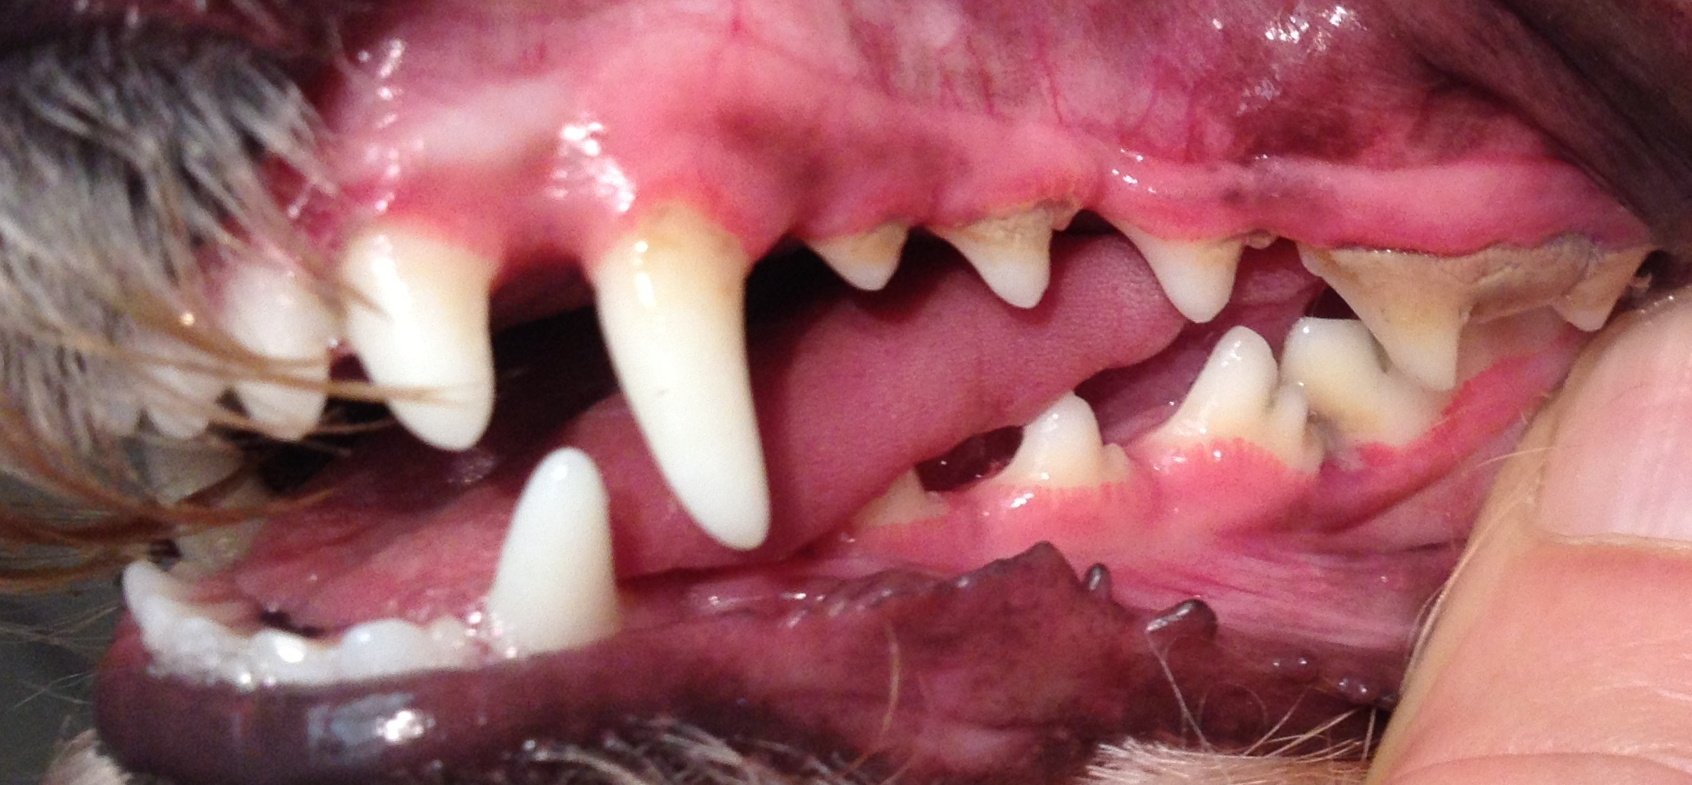 A common area of crowding. Note the increased gingivitis and calculus on molar as a result.